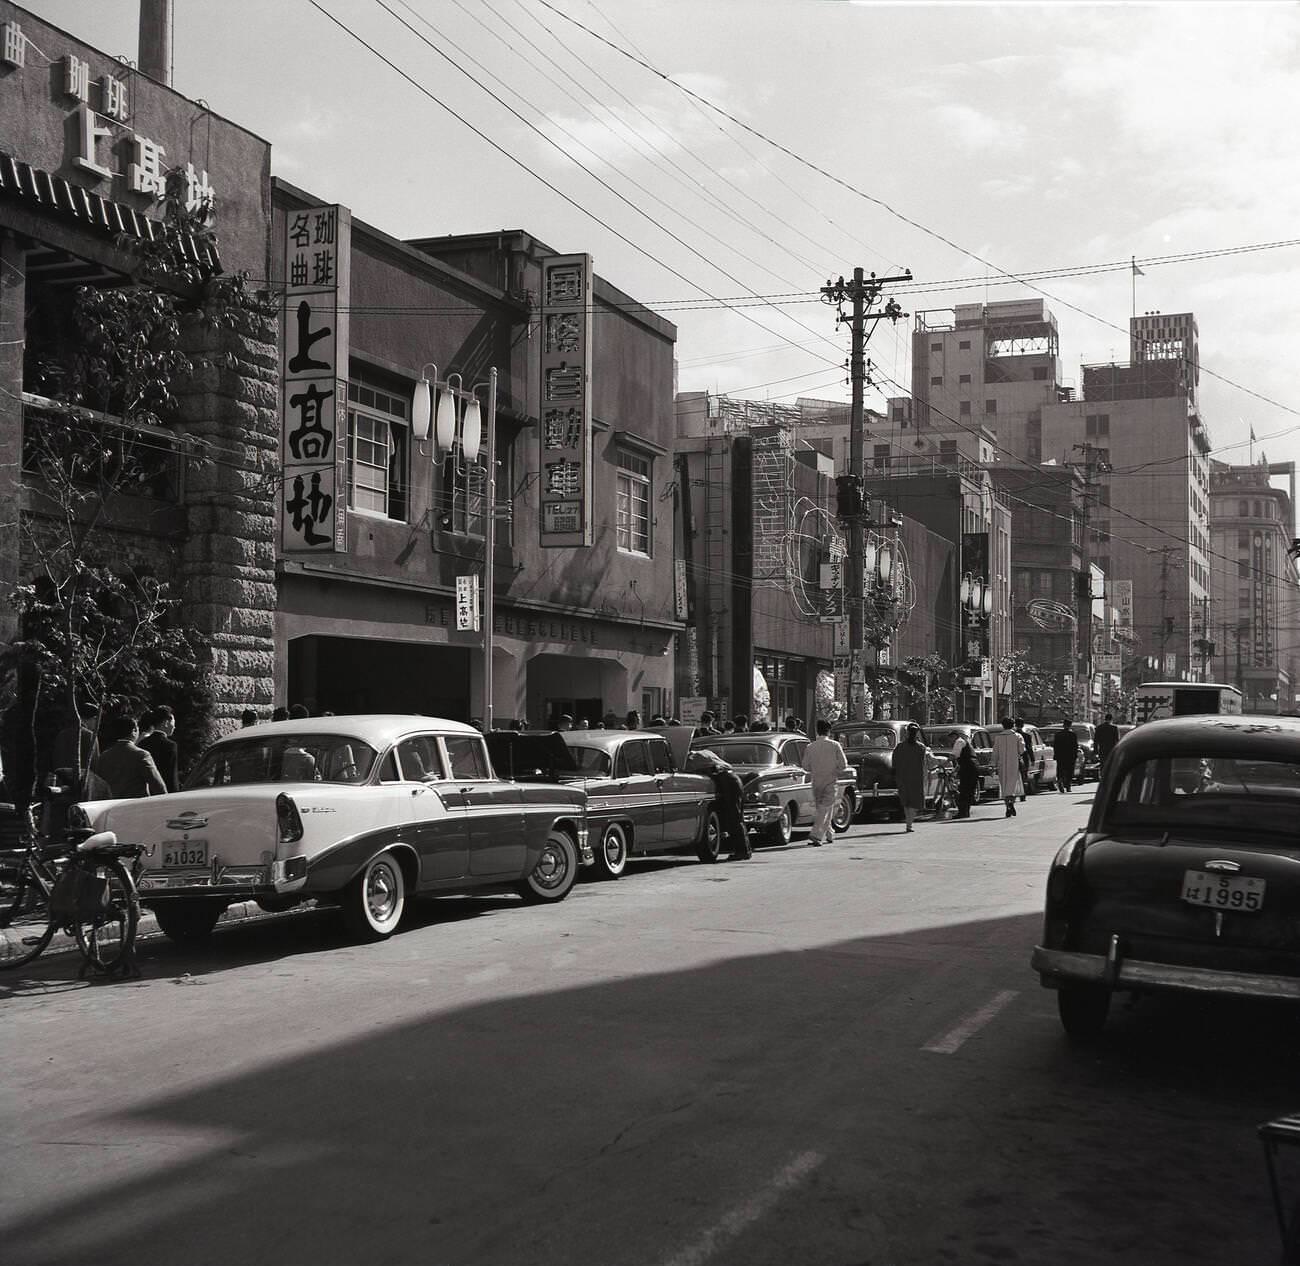 A street scene in Tokyo showing parked American style cars, 1950s.